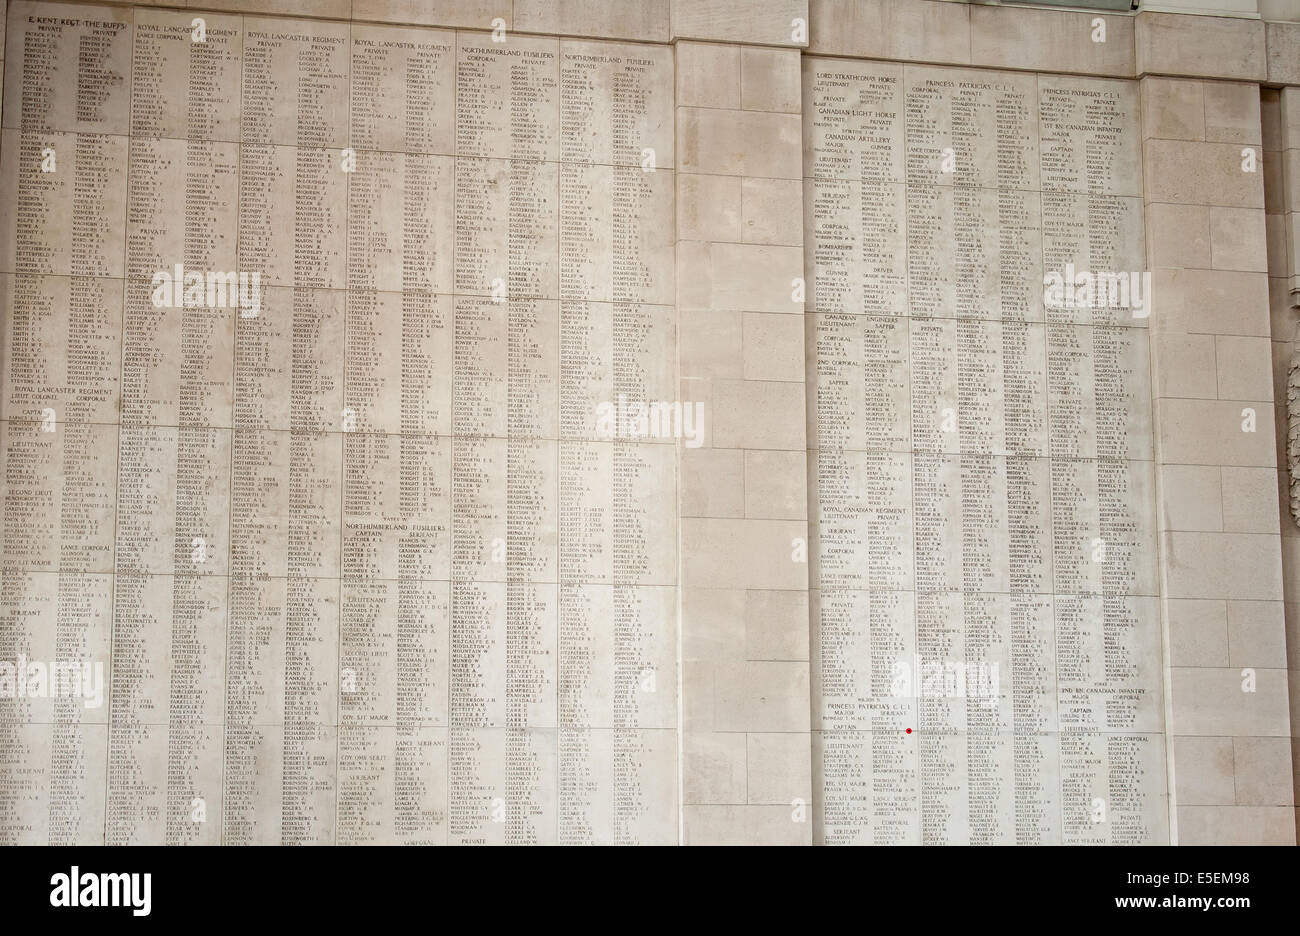 Ypres Menin gate memorial showing names of falling soldiers. Stock Photo